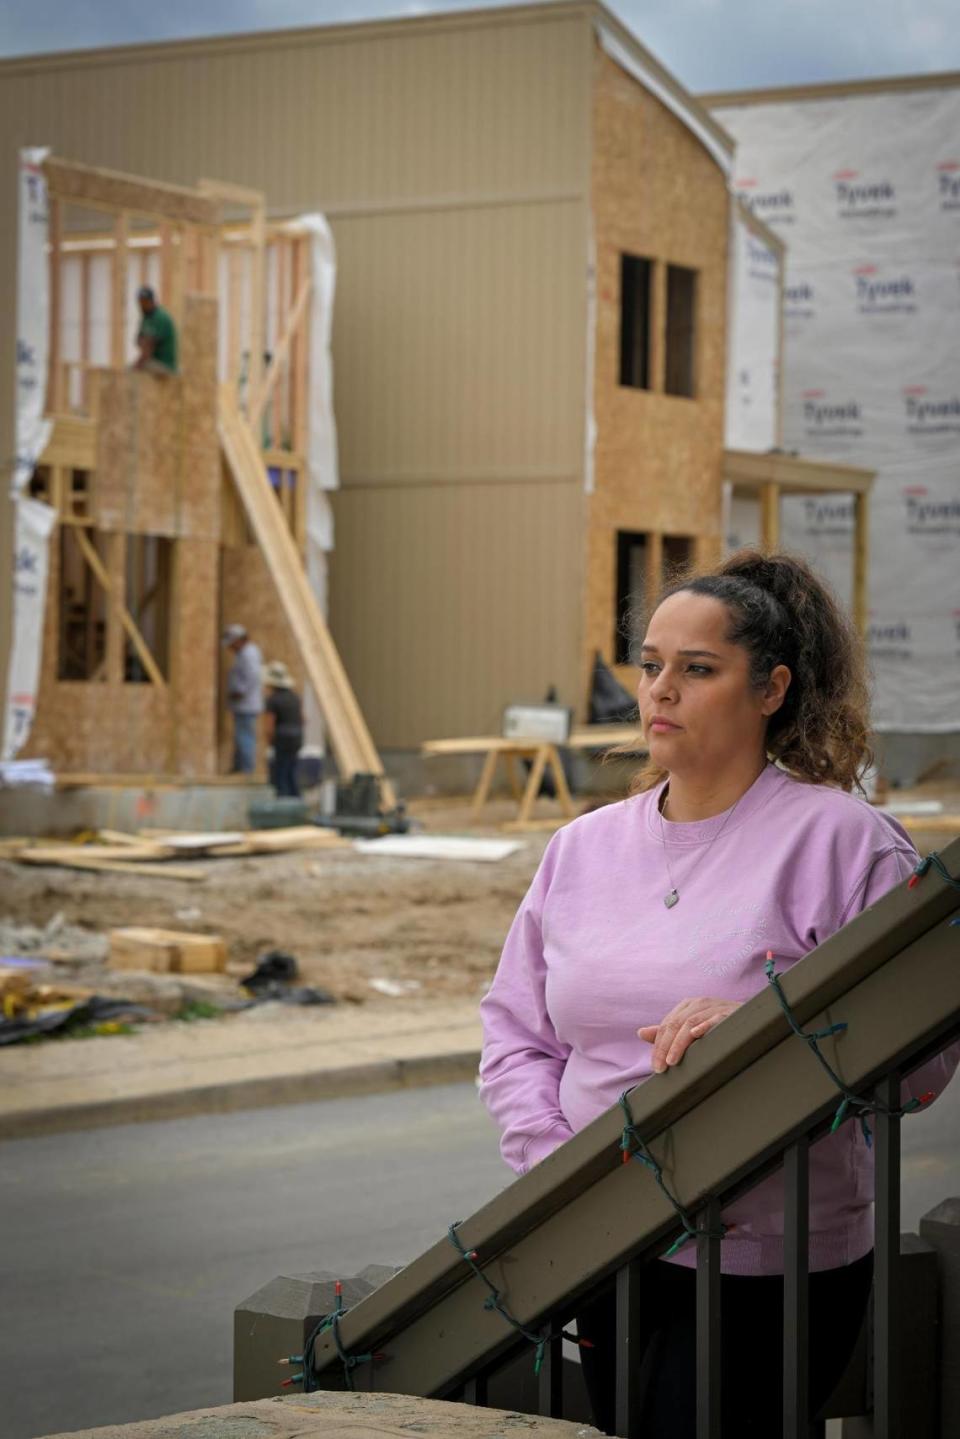 Monique Ortiz, raised on the West Side, lives with her family in a 120-year-old home on Mercier Street. Her new neighbors will occupy 16 new contemporary houses. “It’s like one world is here and, across the street, is another. It changes the culture.” she said.